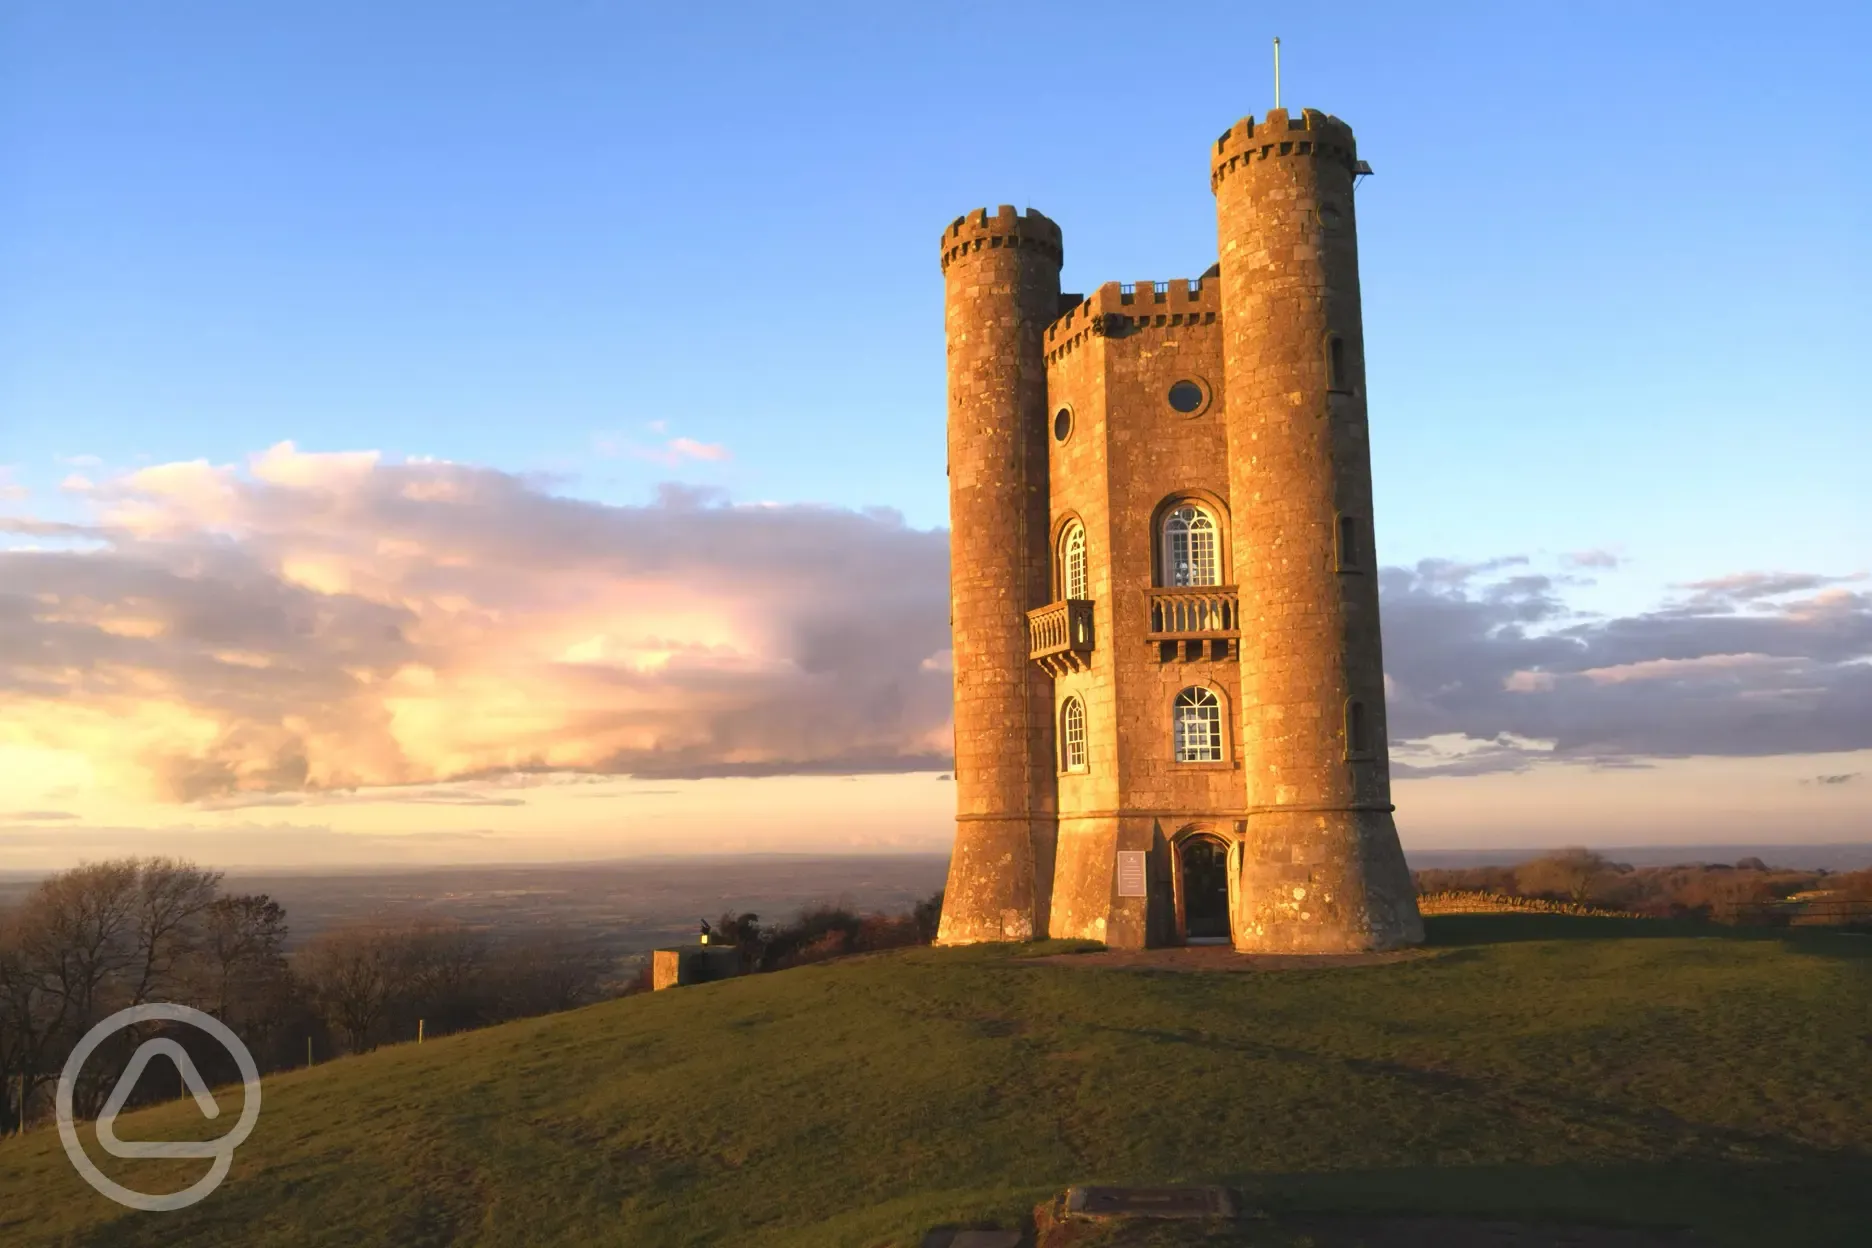 Broadway Tower, a few minutes drive from our site